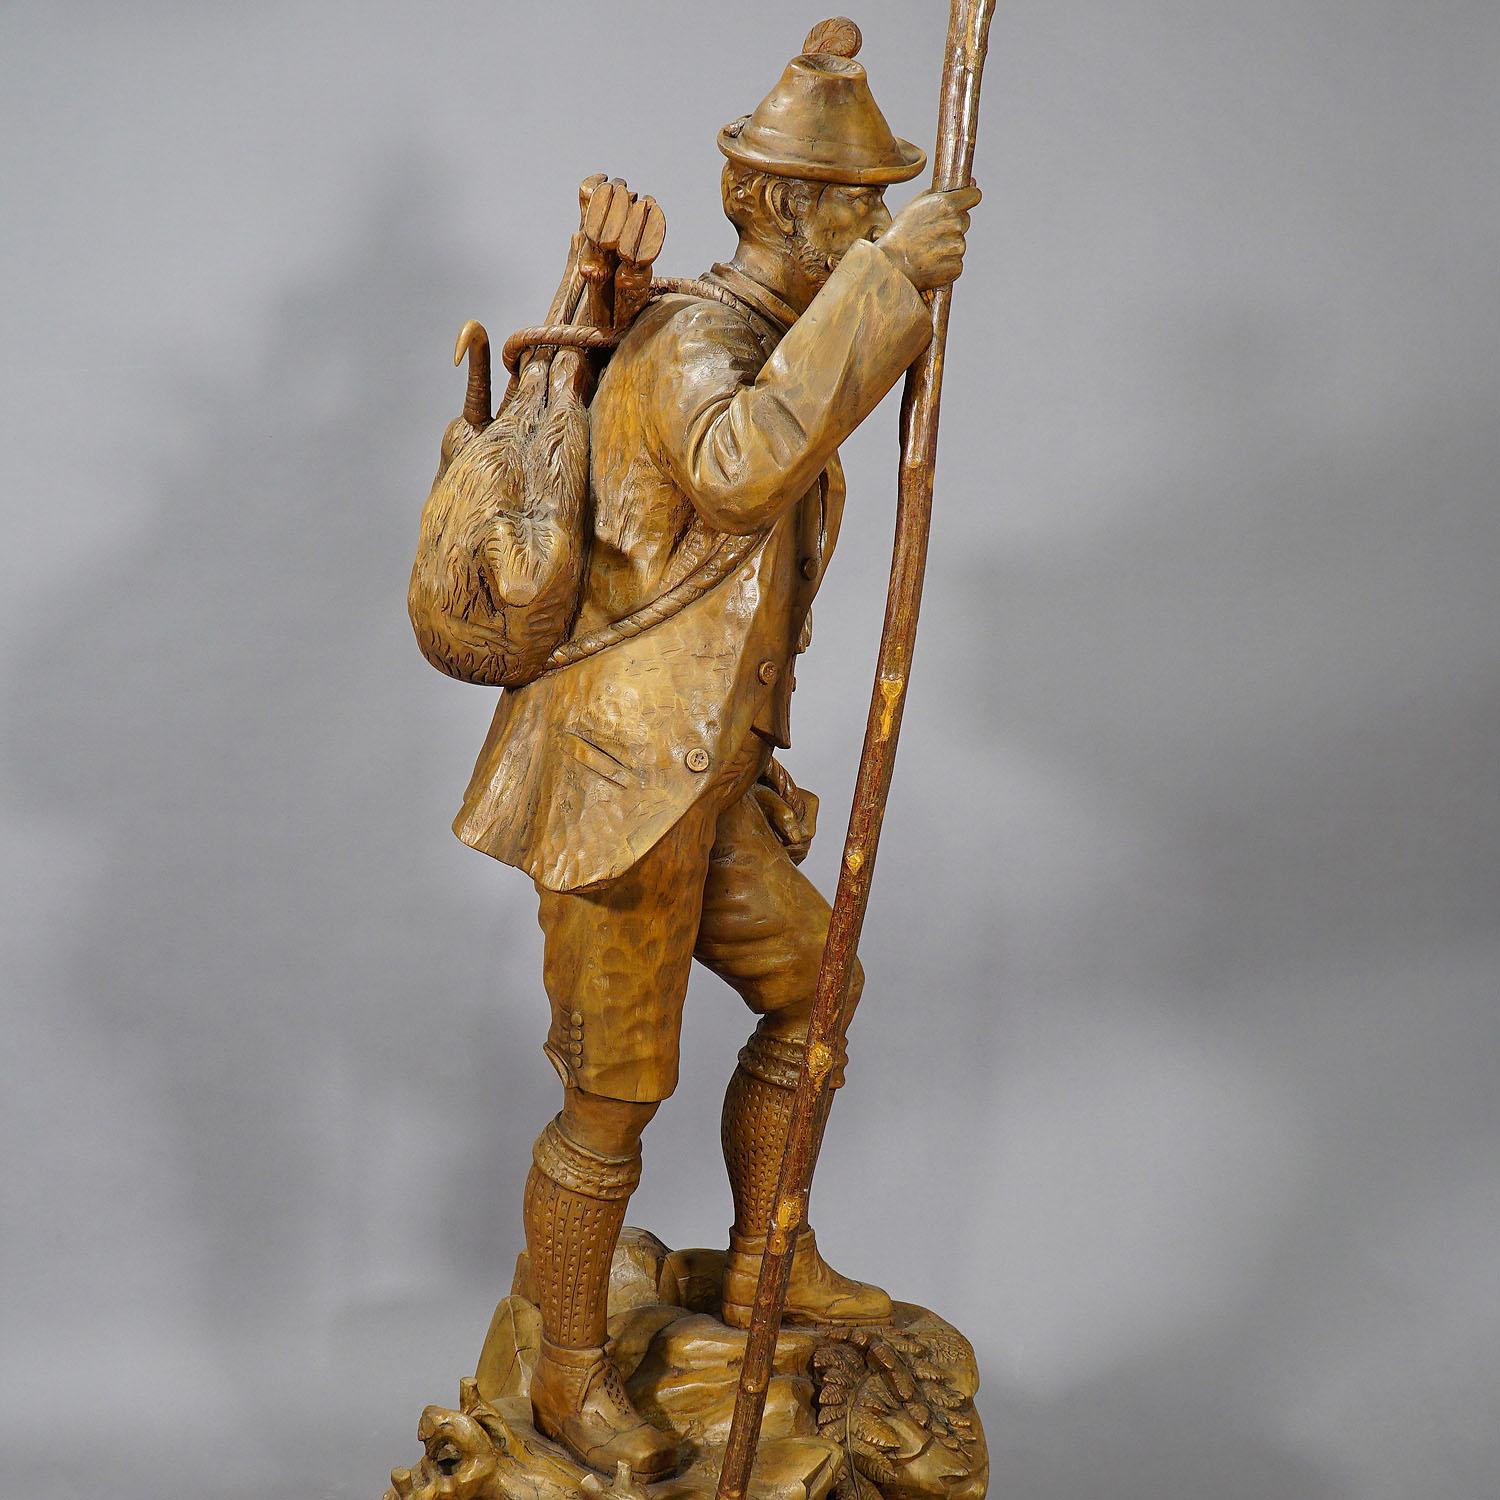 A very large wooden handcarved poacher statue. The poacher is on his way back from the hunt with a hunted chamois on his back. The hand-made sculpture was executed ca. 1900 in the area of Brienz, Swizerland.
Measures: Width 23.62